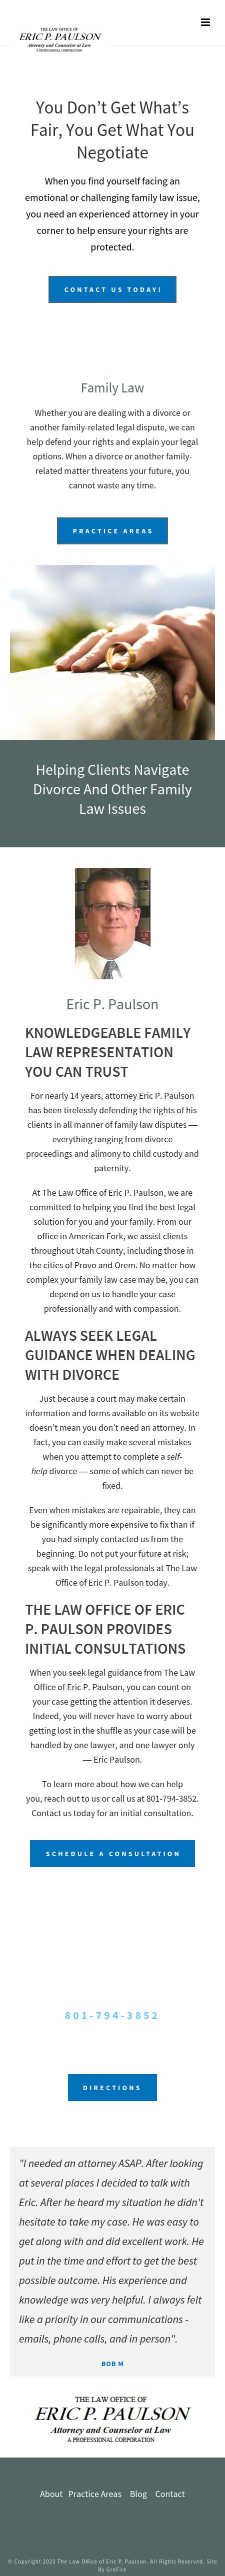 The Law Office of Eric P. Paulson - Spanish Fork UT Lawyers